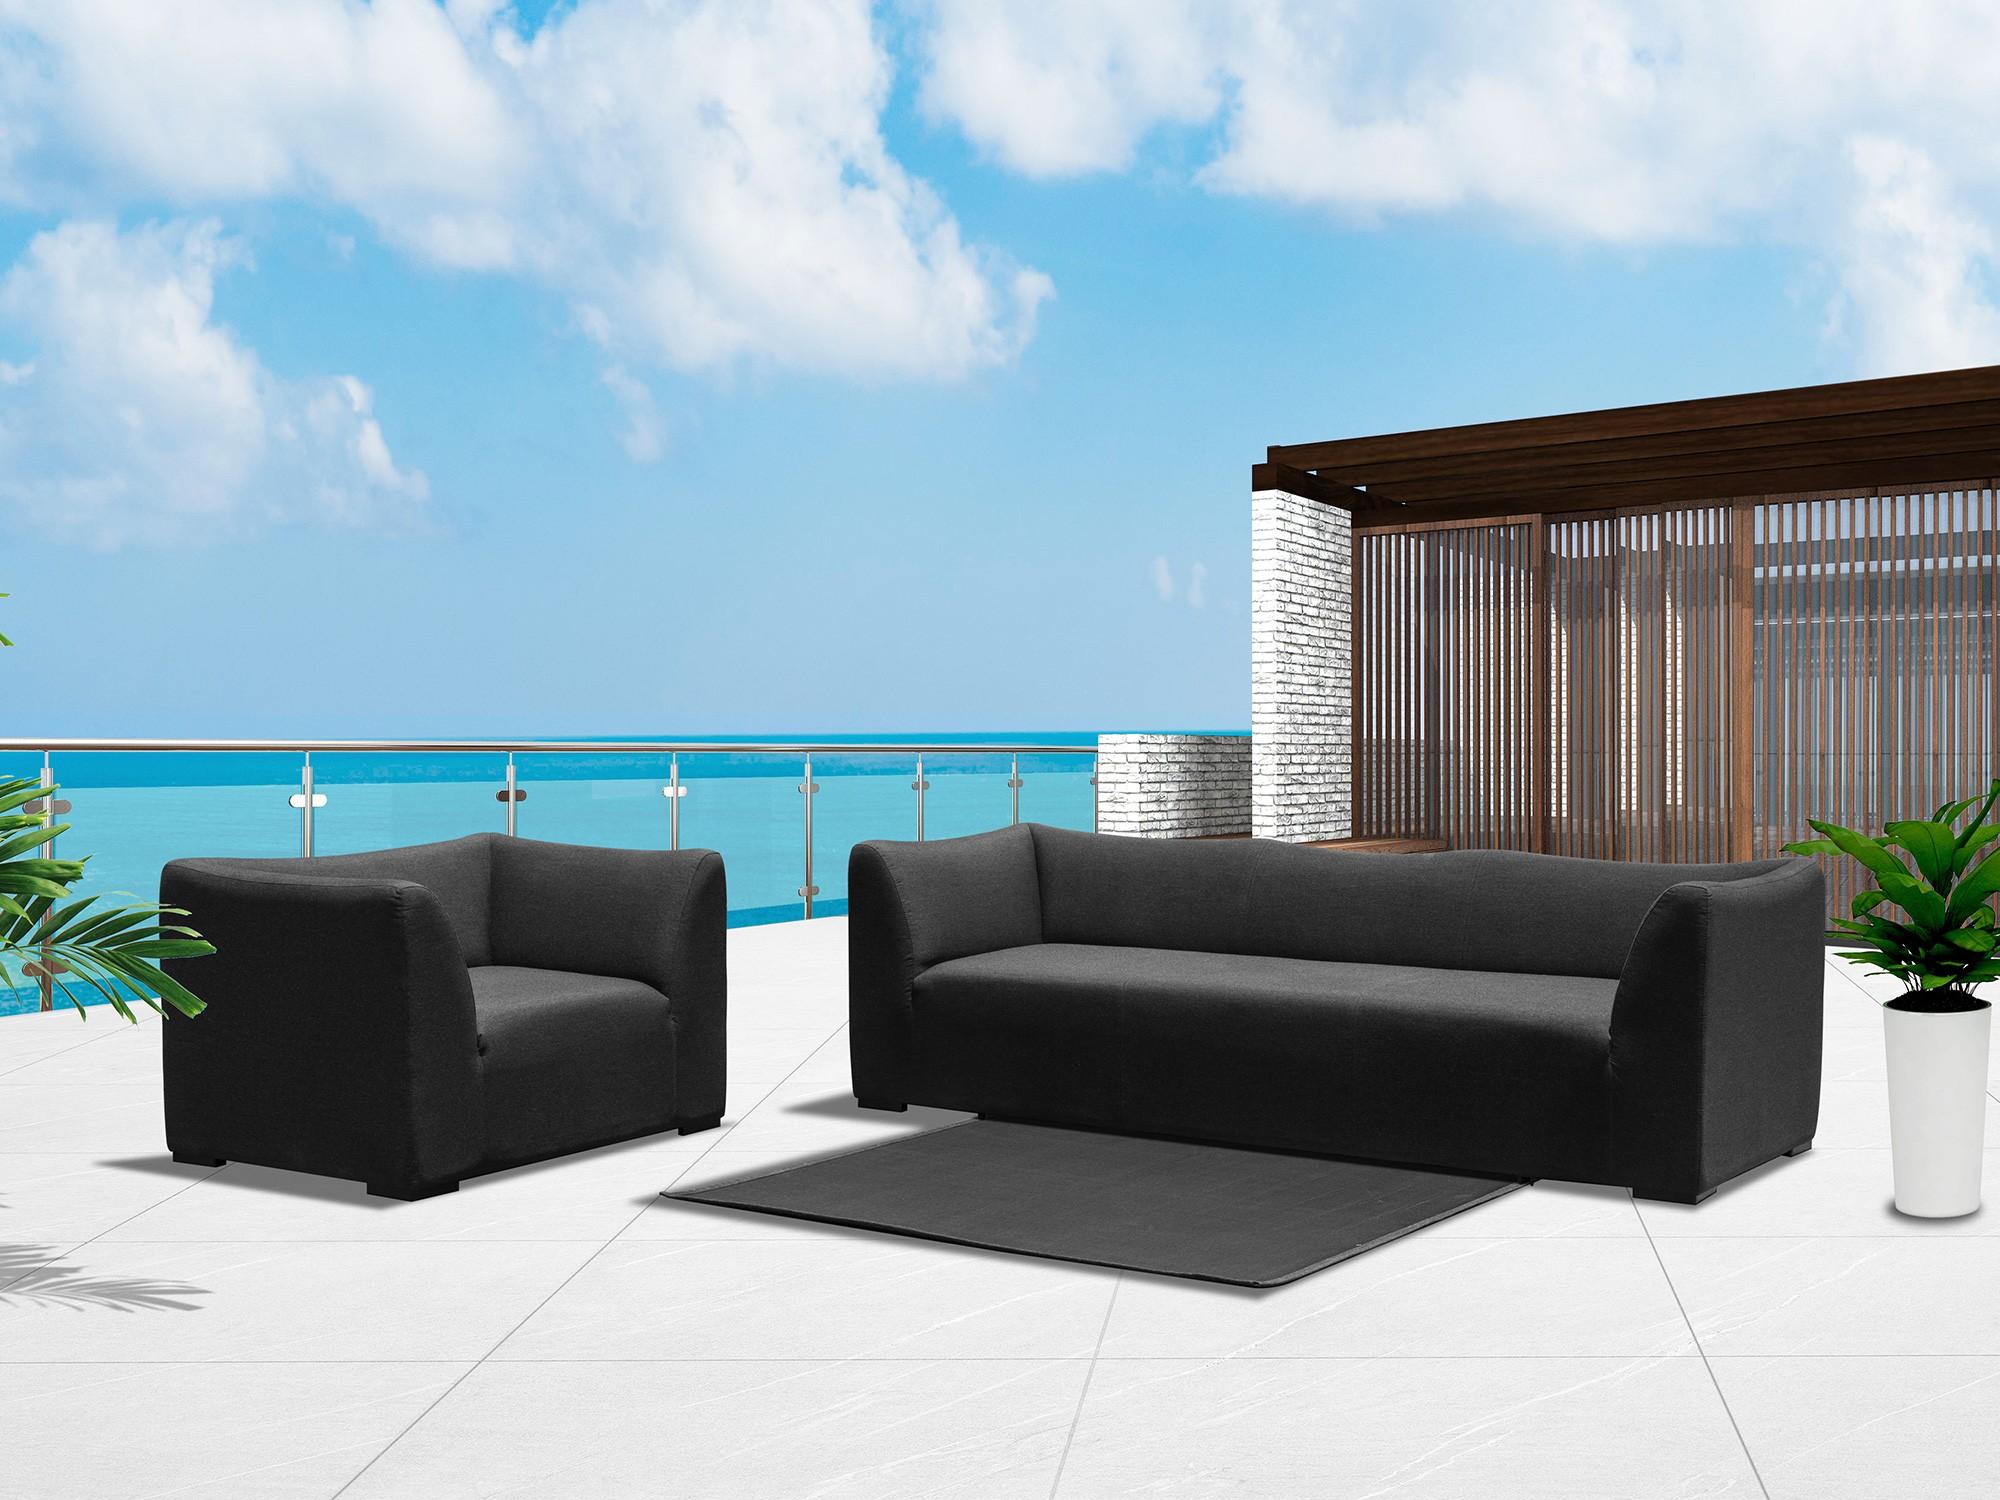 Contemporary Outdoor Sofa and Chair Harmony SO1575-CH1575 -Set-2 in Charcoal Fabric